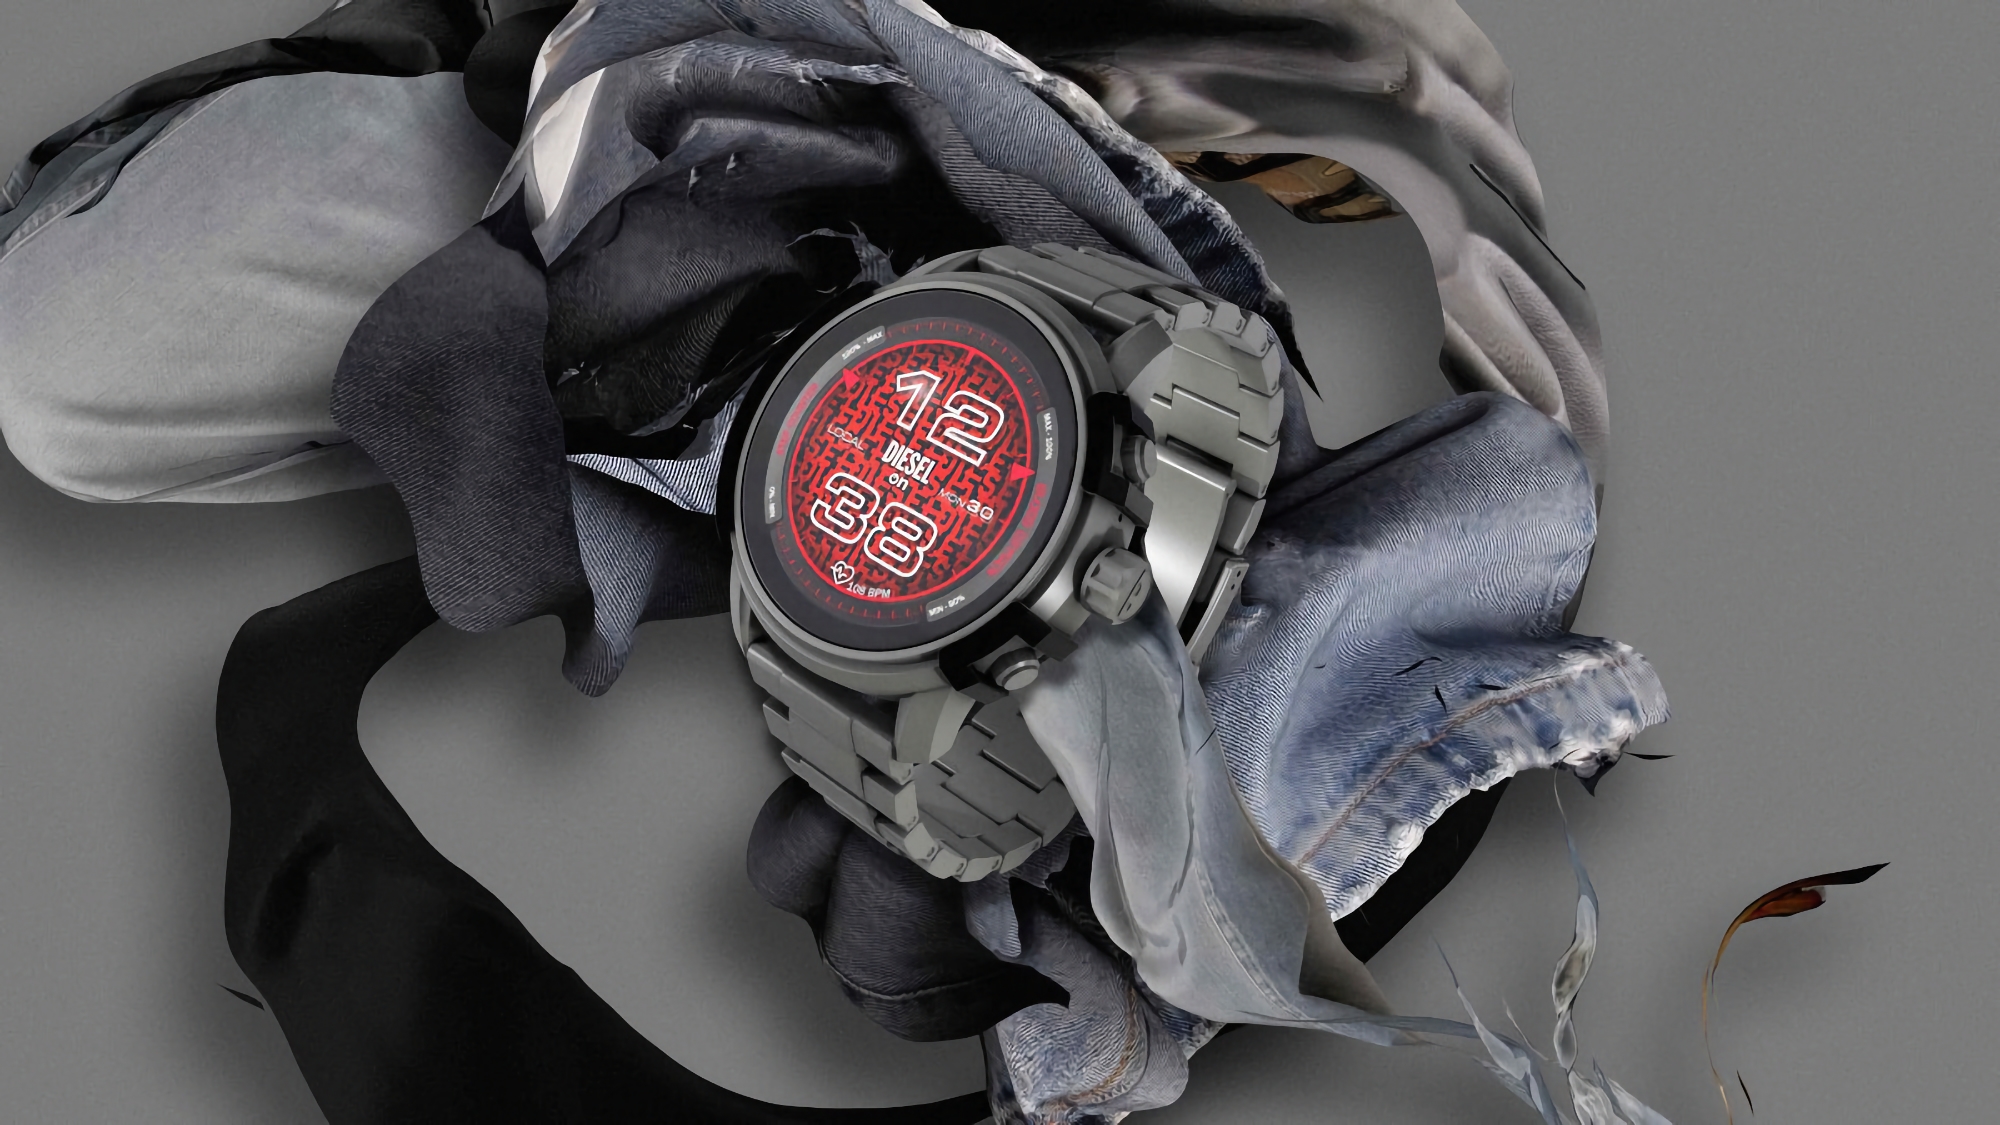 Diesel Griffed Gen 6: Wear OS 3 smartwatch with NFC and SpO2 sensor for $350